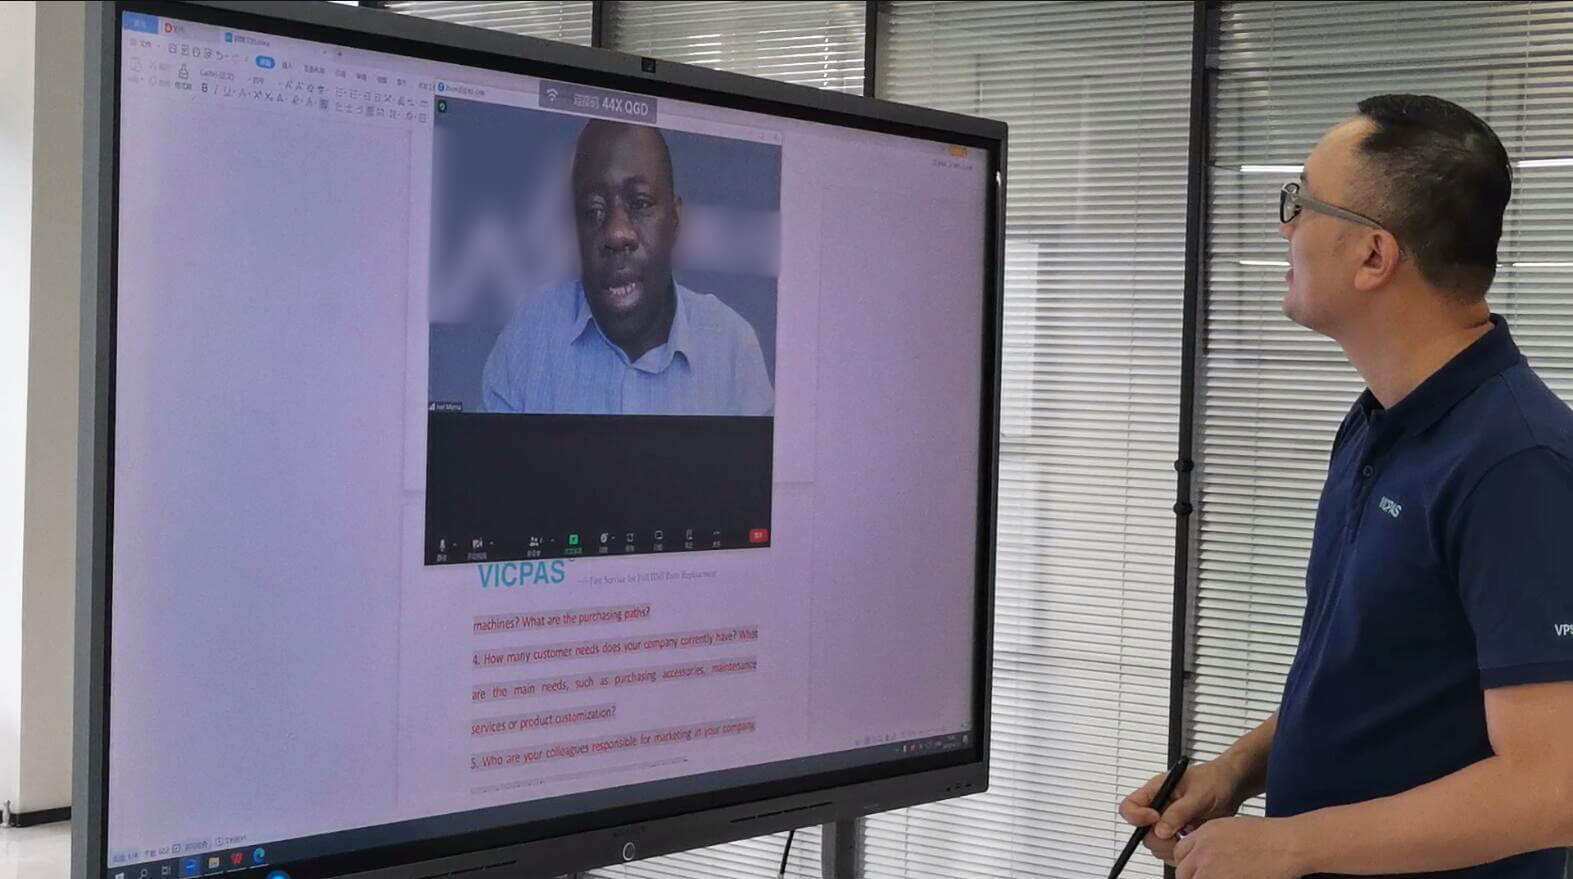 VICPAS Strengthens Global Collaboration Through In-Depth Video Conference